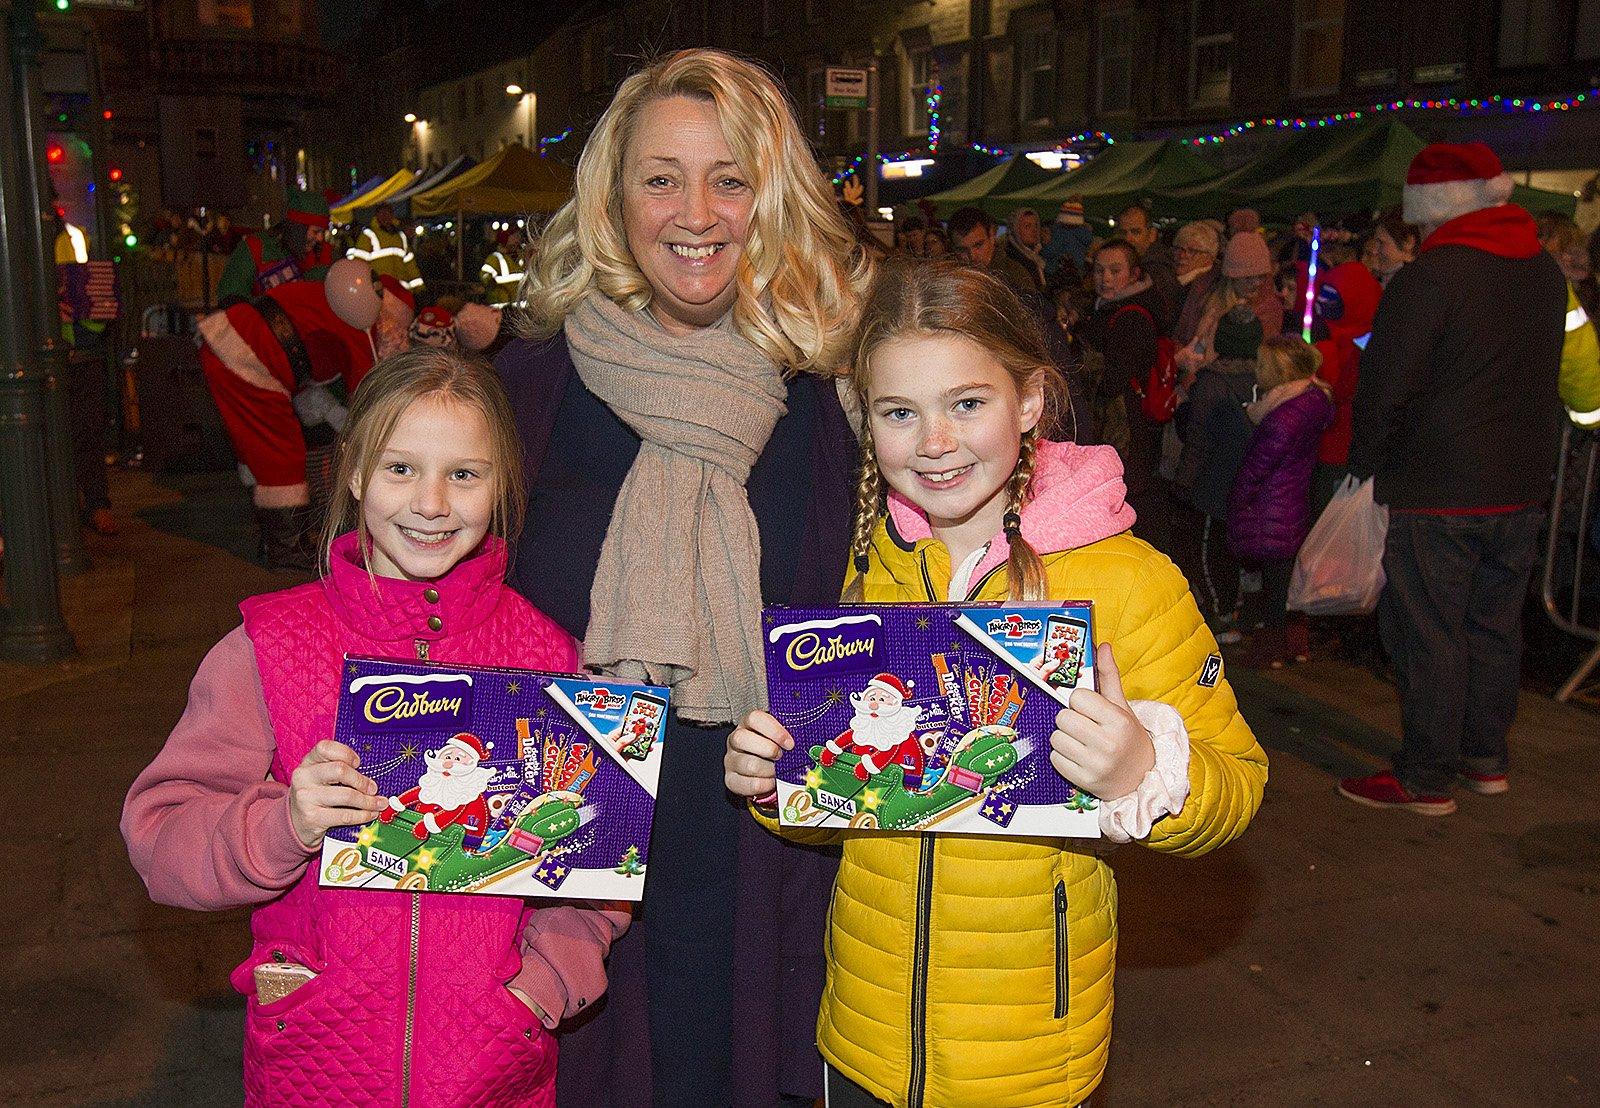 Bethany Bell, Tracey Brown and Caitlin Rae with their selection boxes from Santa